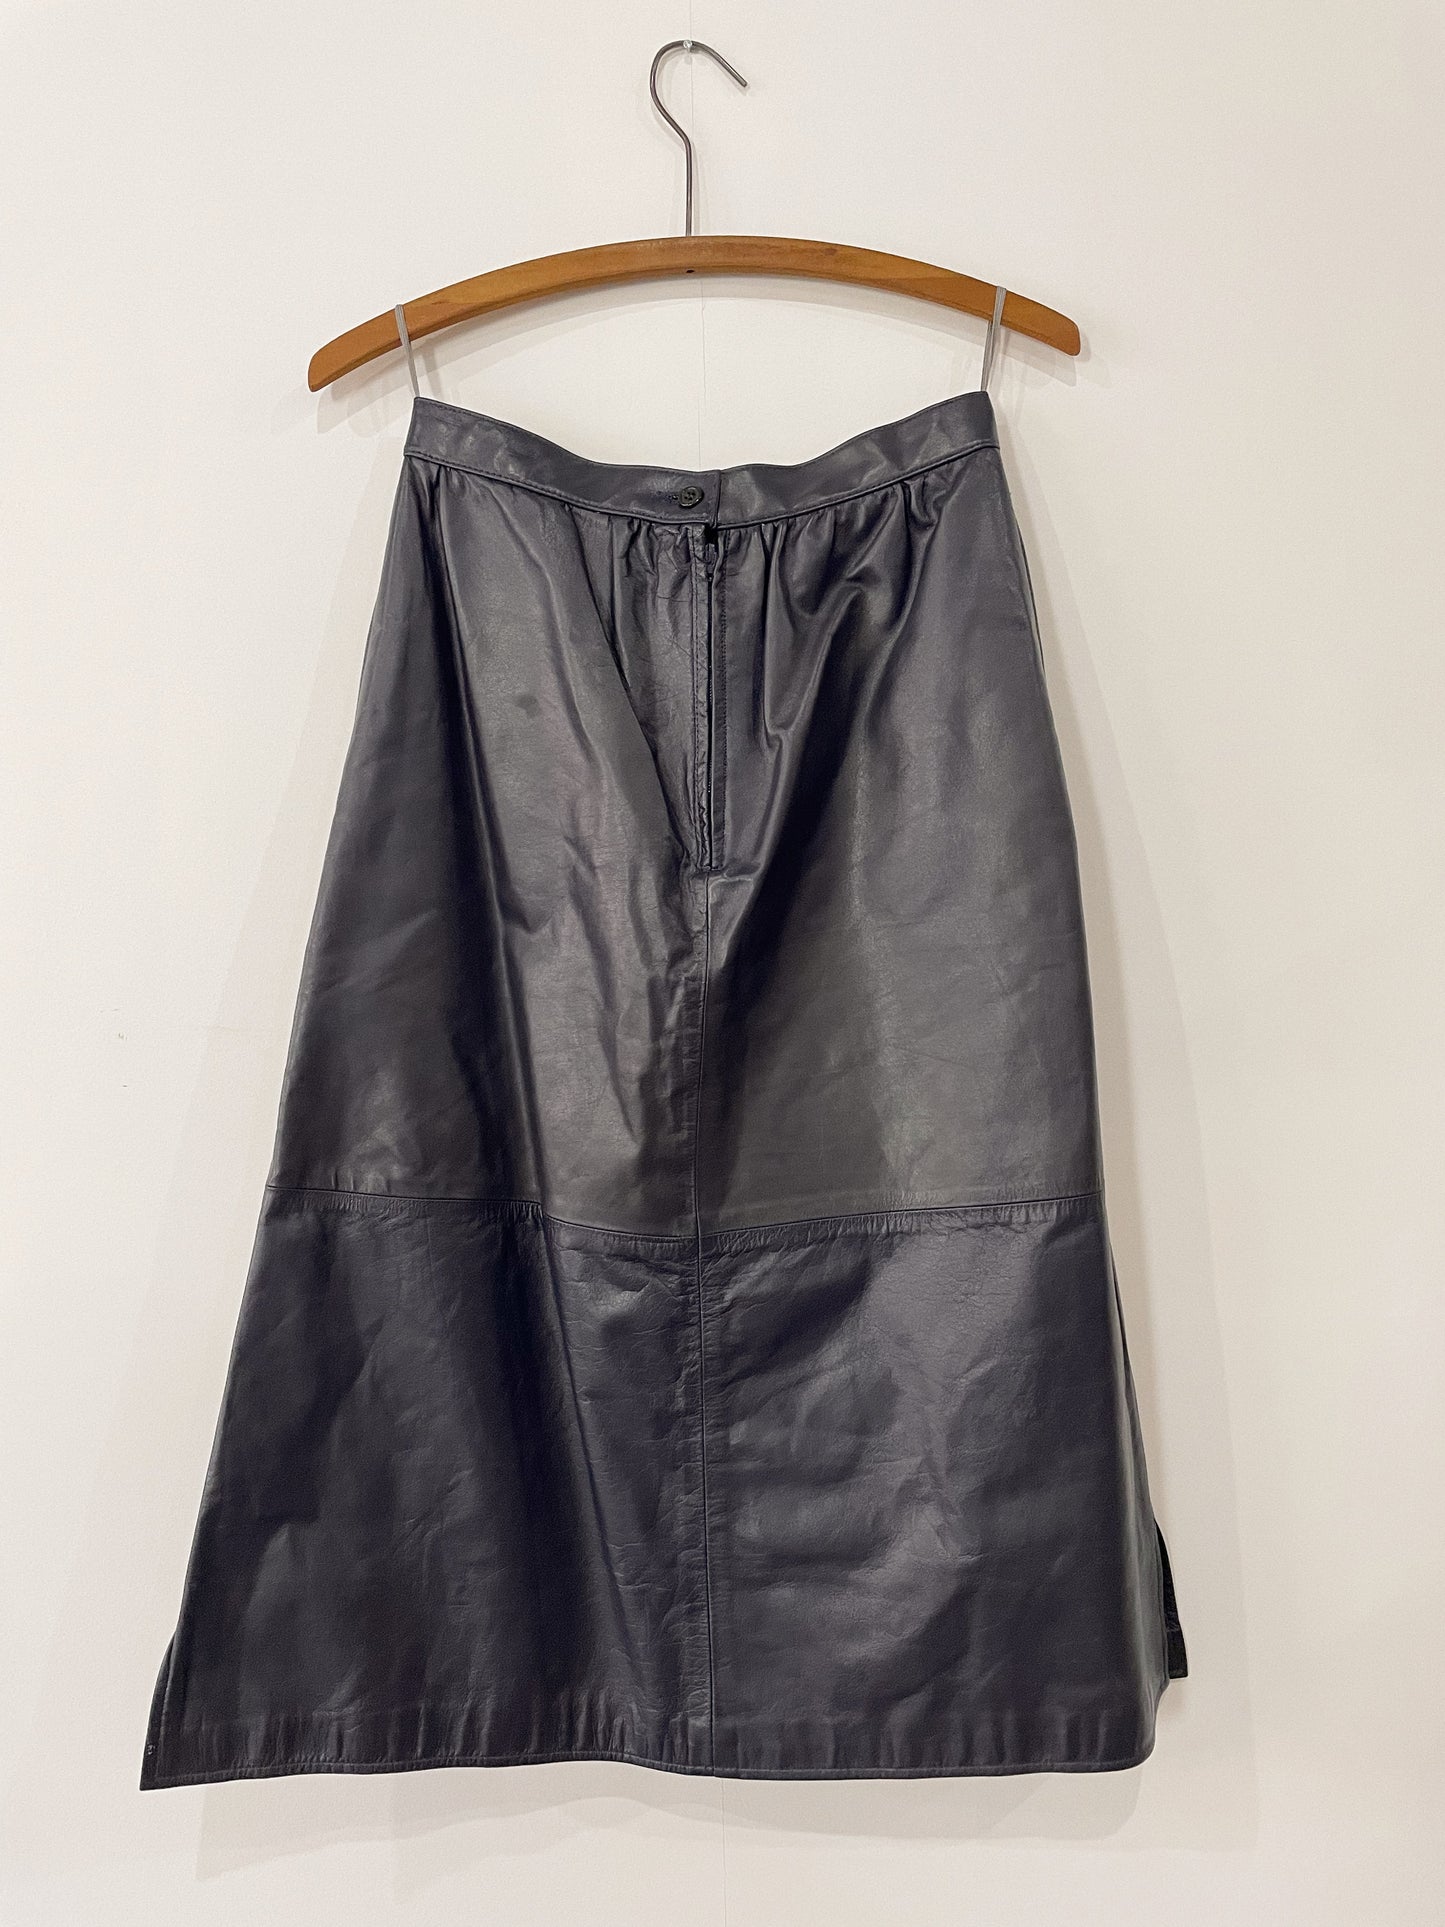 West Bay Navy Leather Skirt